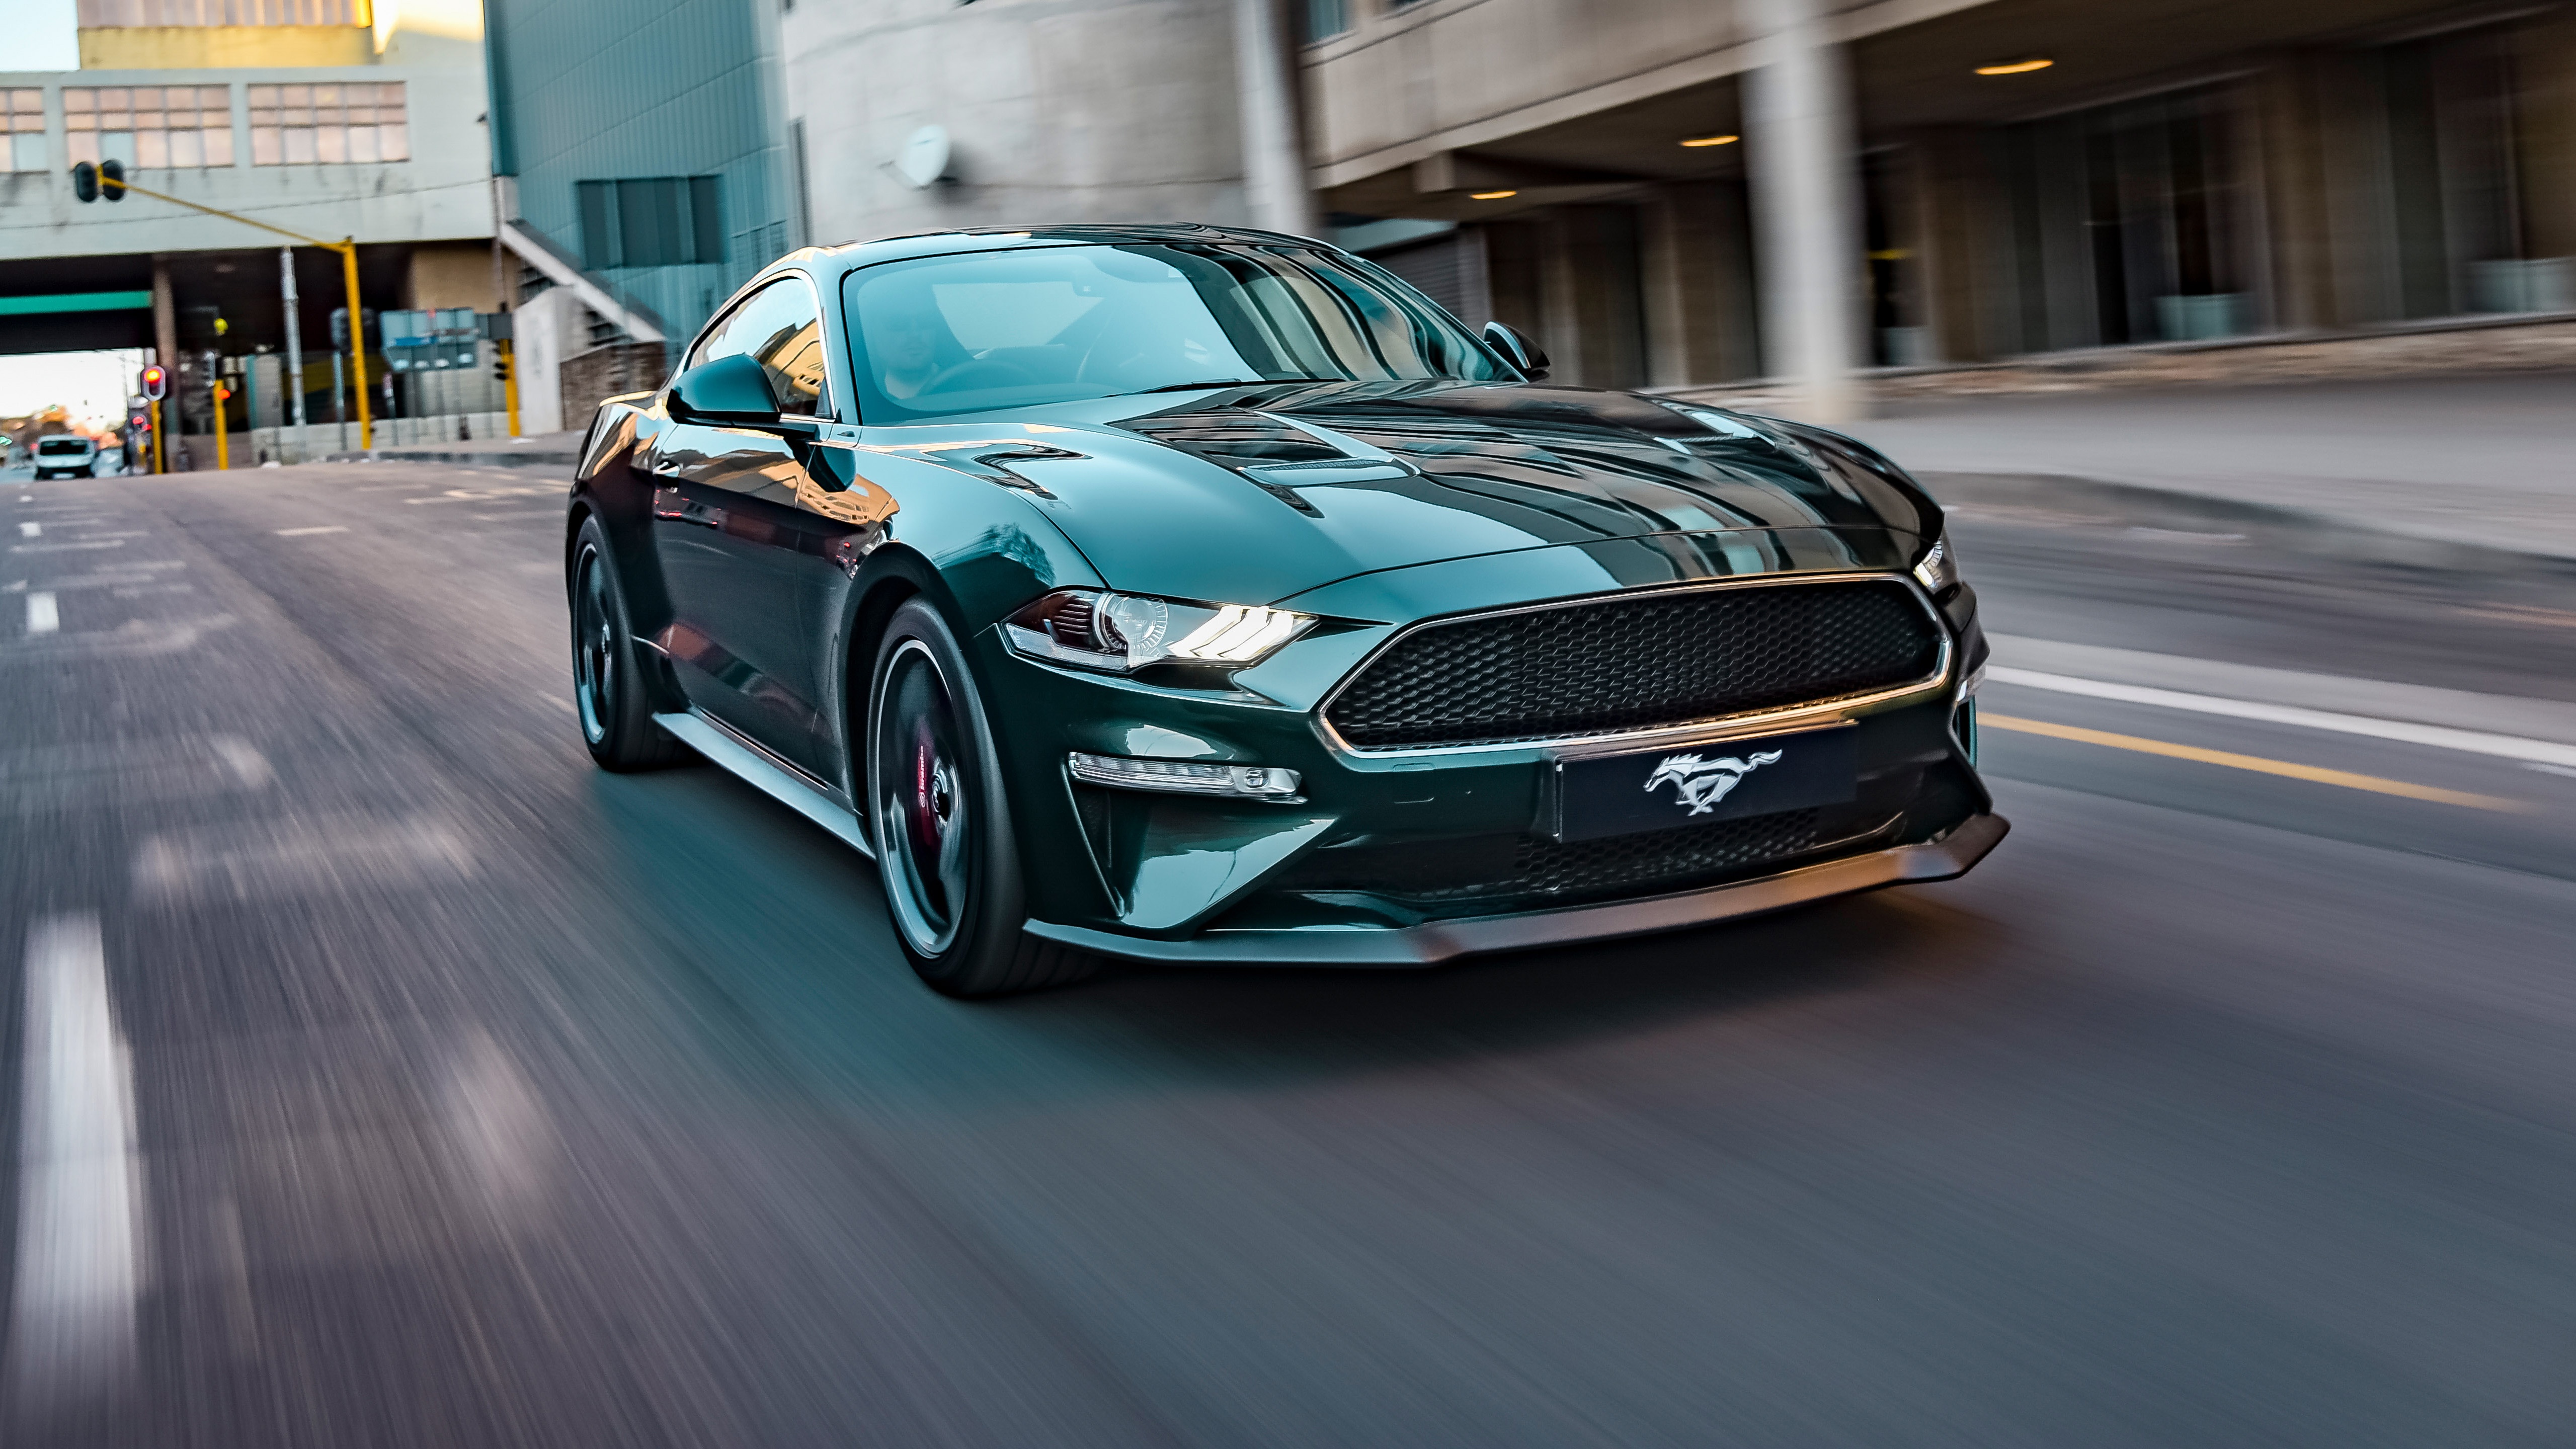 Car Ford Ford Mustang Ford Mustang Bullitt Green Car Muscle Car Vehicle 5120x2880